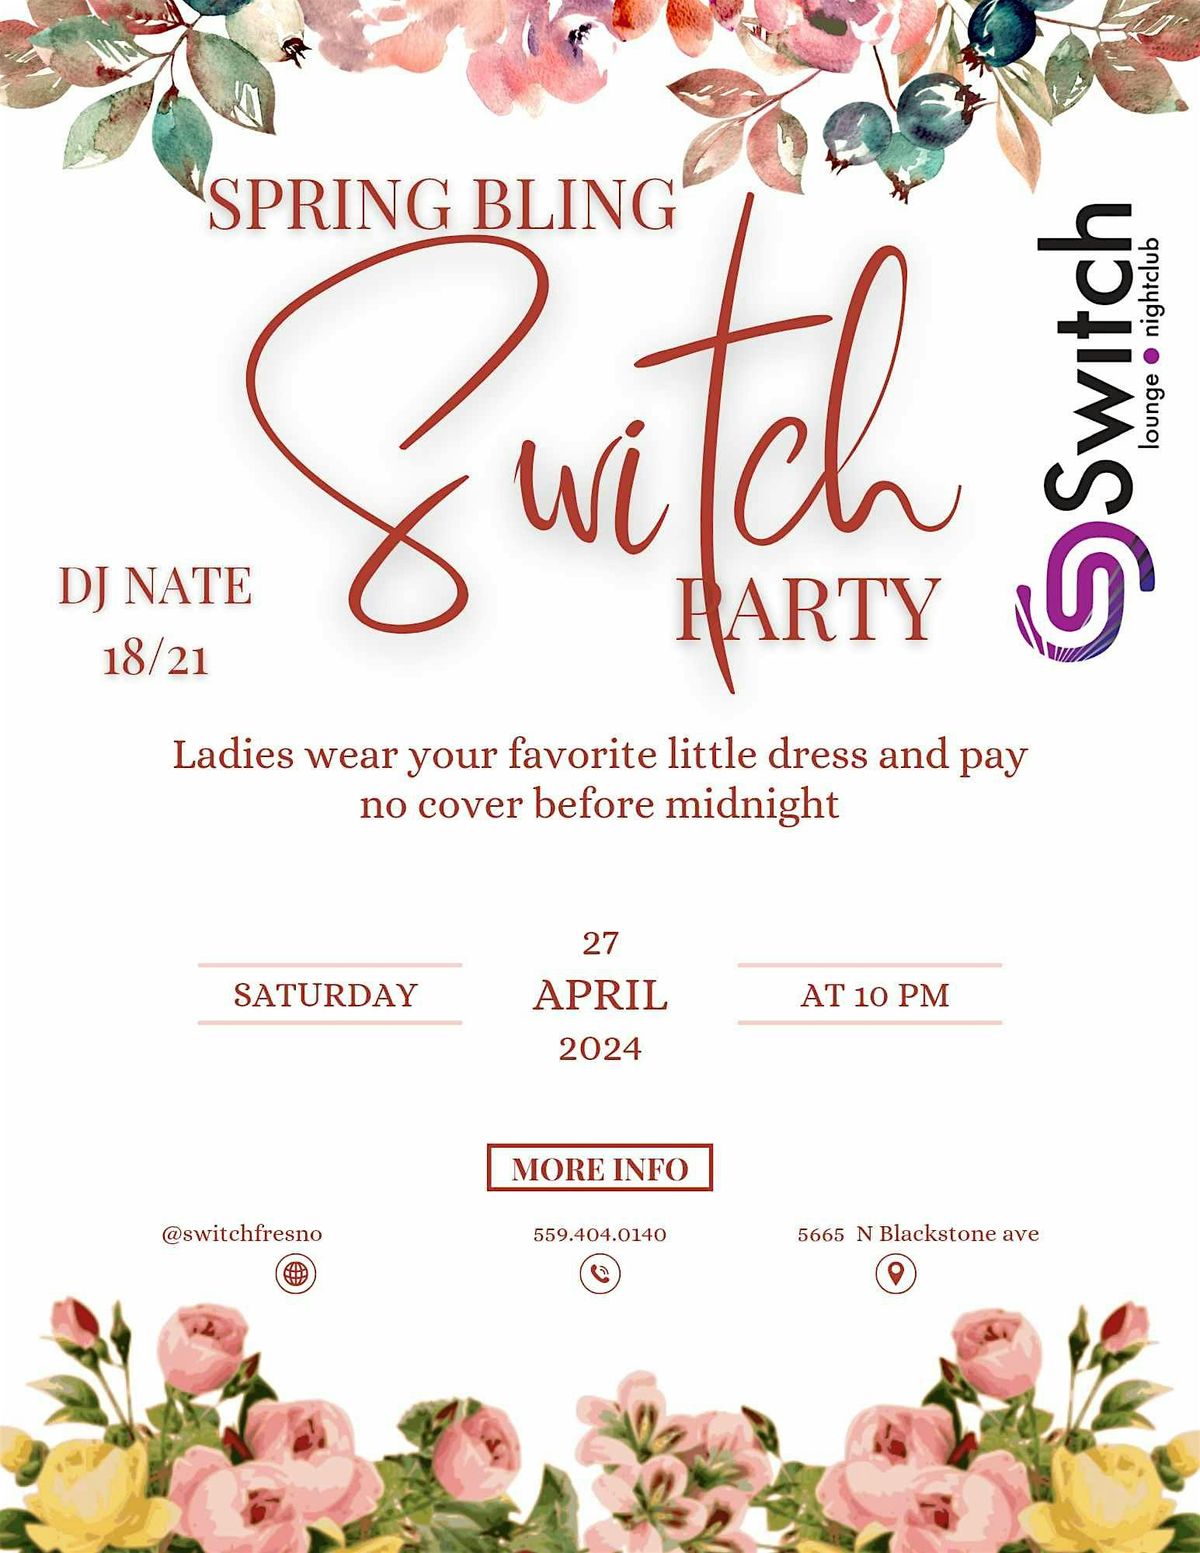 Springbling with DJ Nate at Switch 18+\/21+